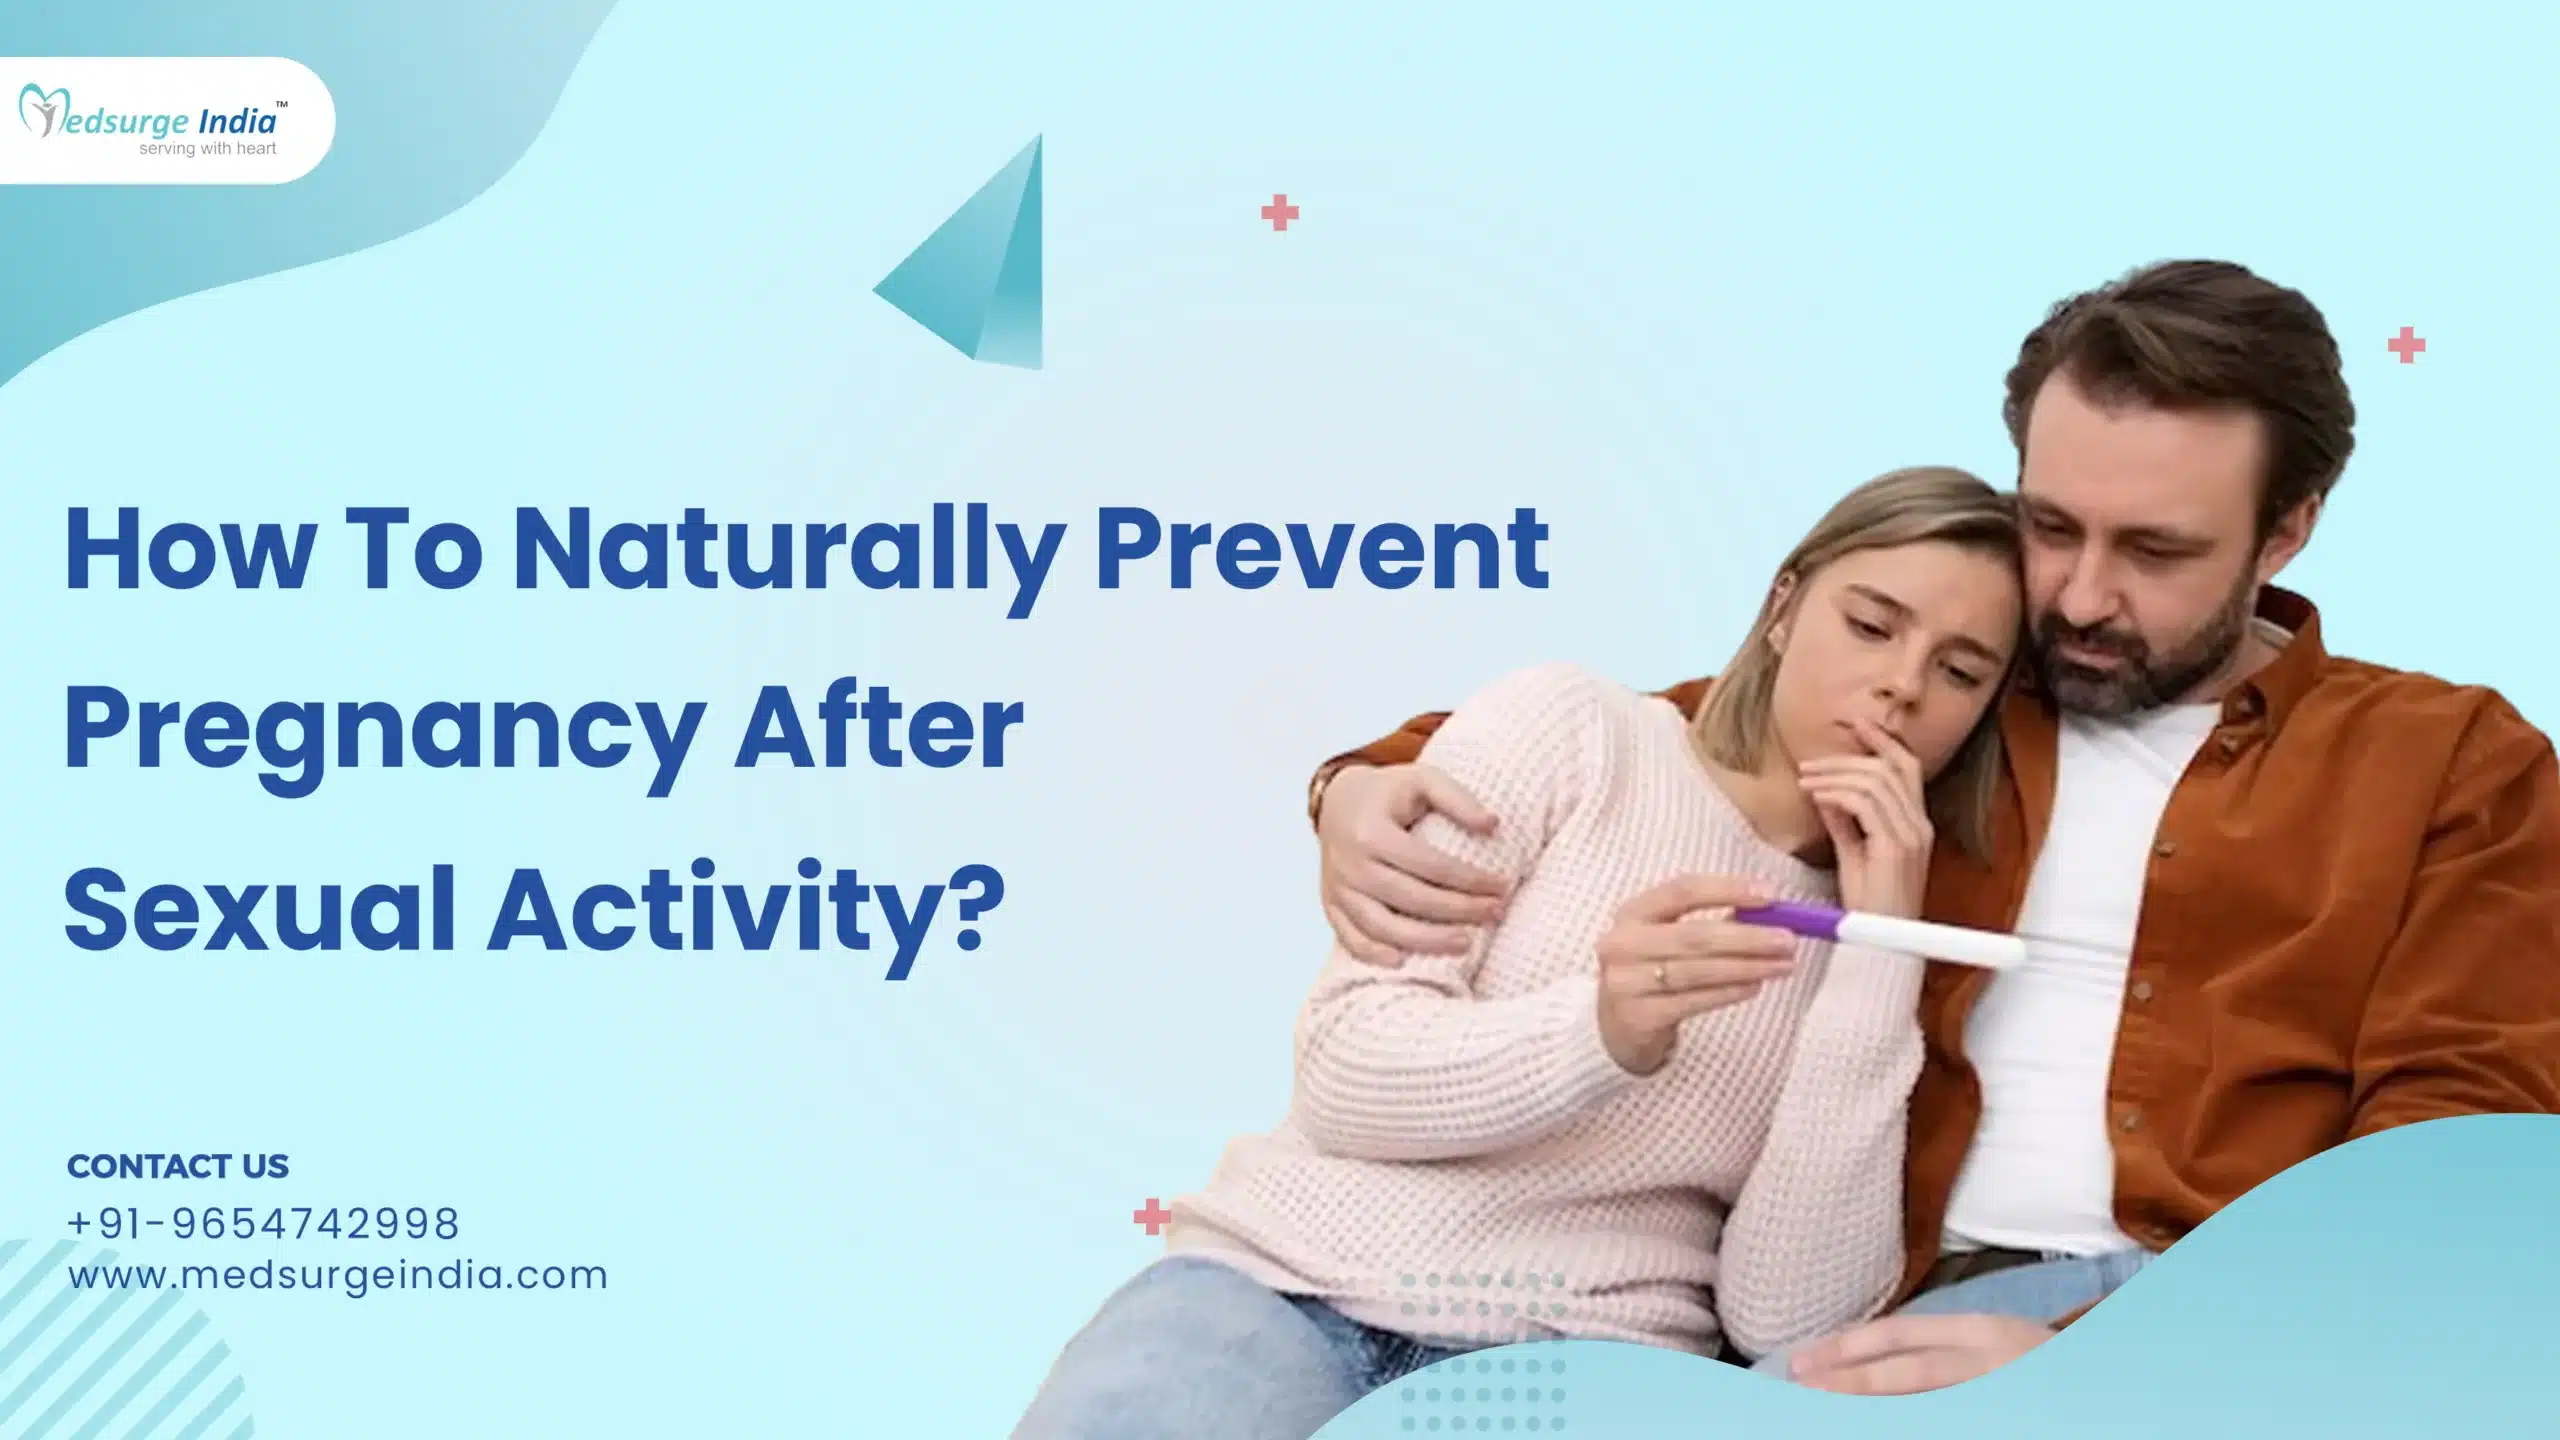 How To Naturally Prevent Pregnancy After Sexual Activity?